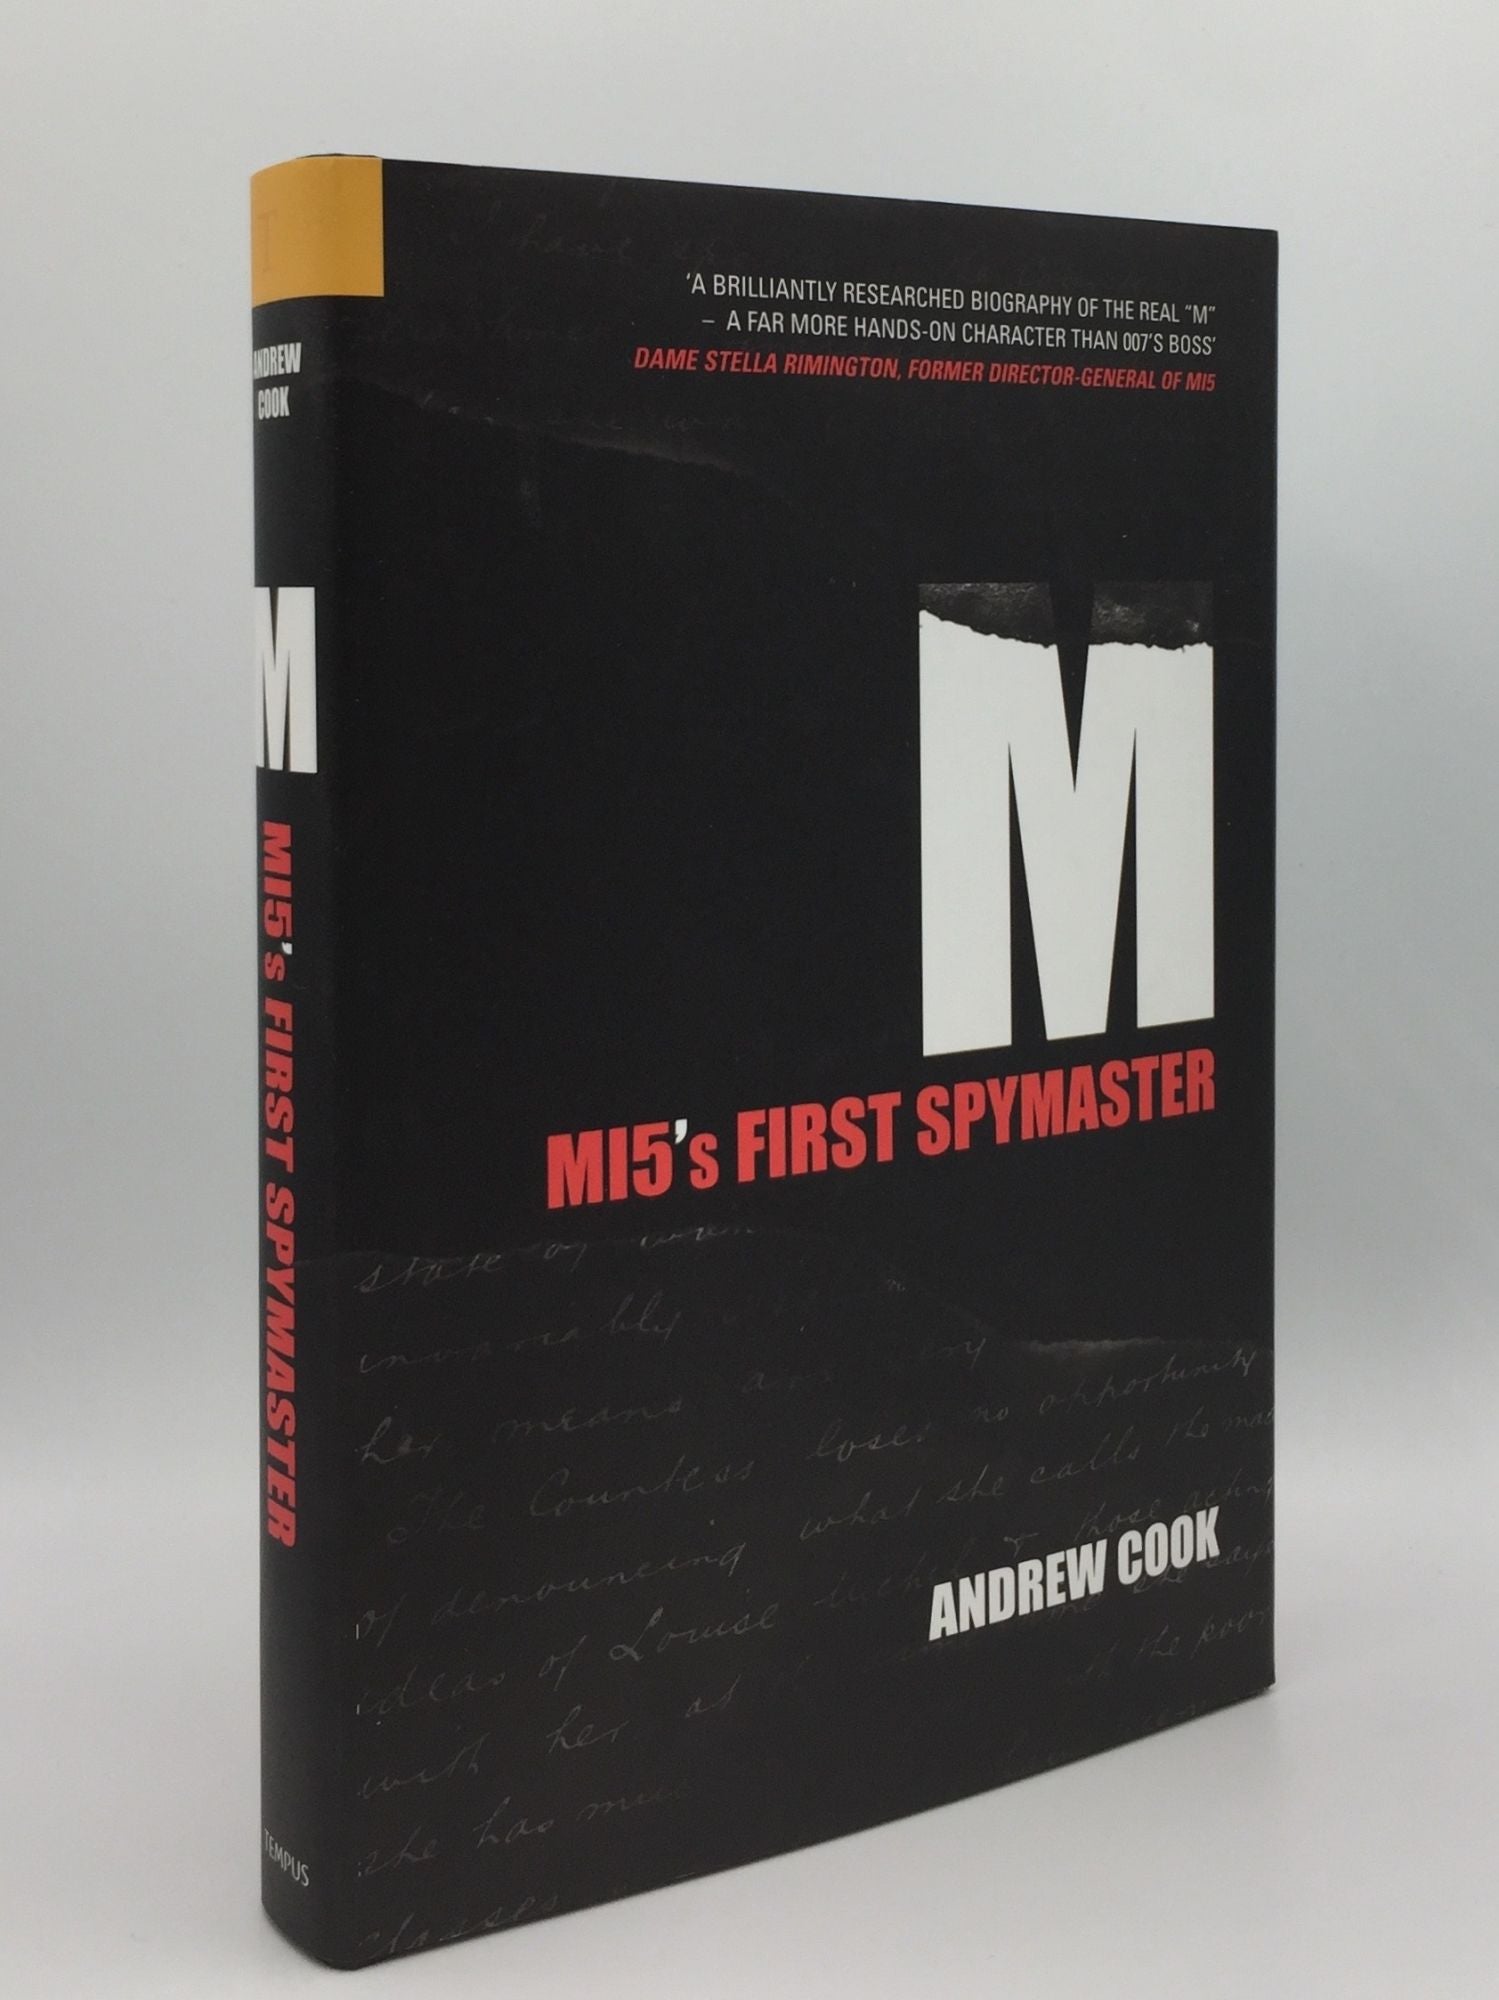 COOK Andrew - M Mi5's First Spymaster